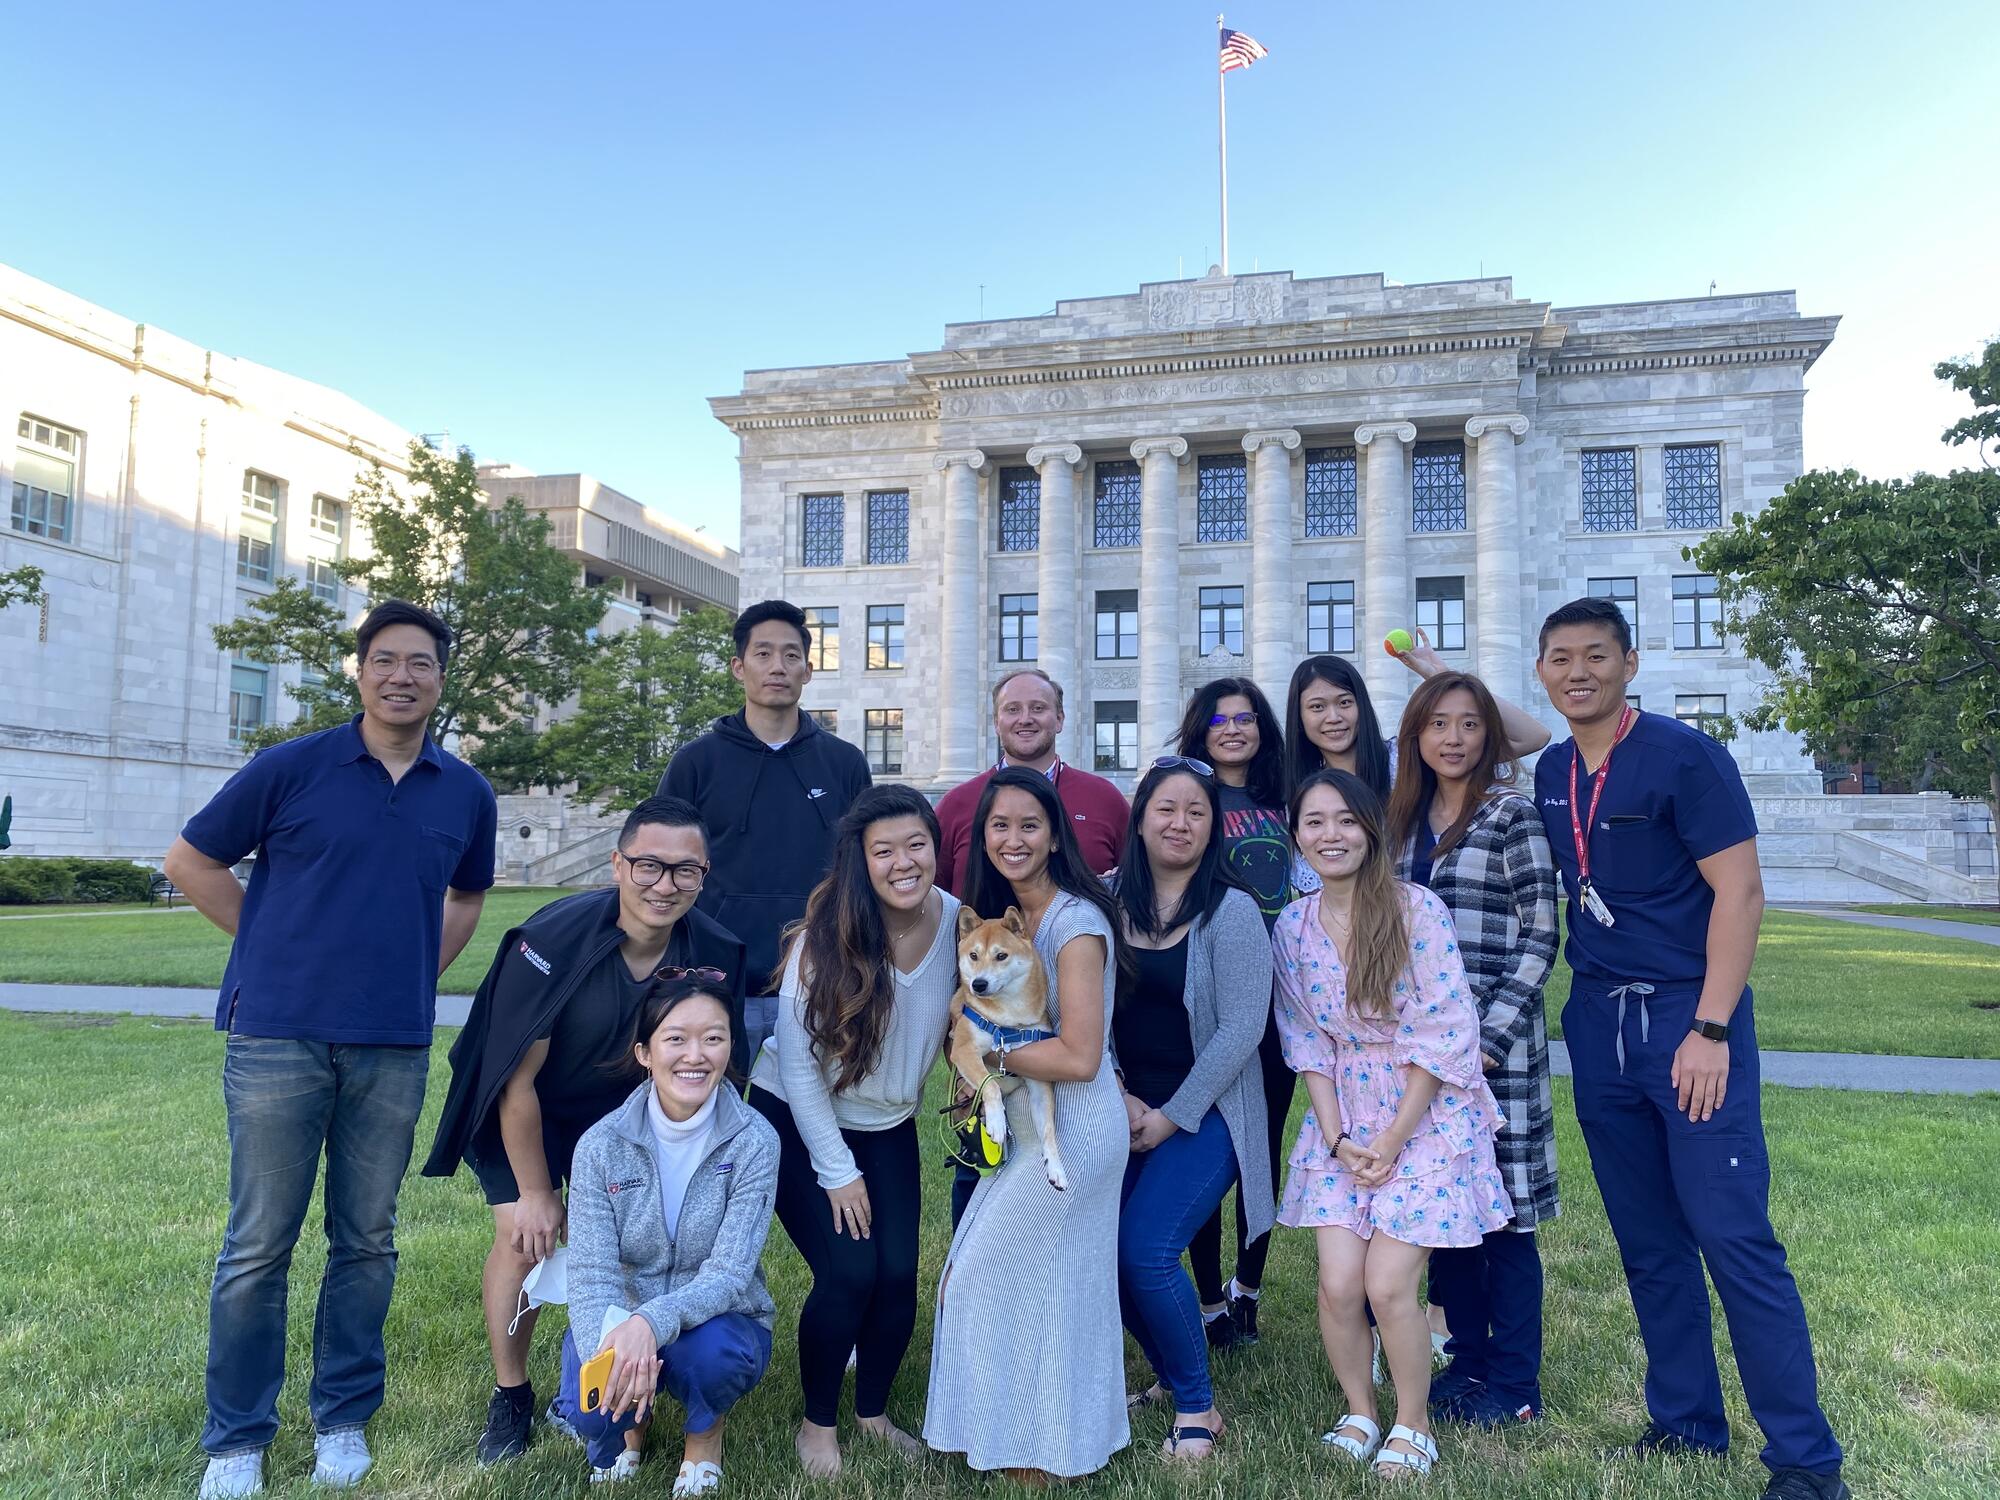 Group of students outside posing in front of the Harvard Medical School